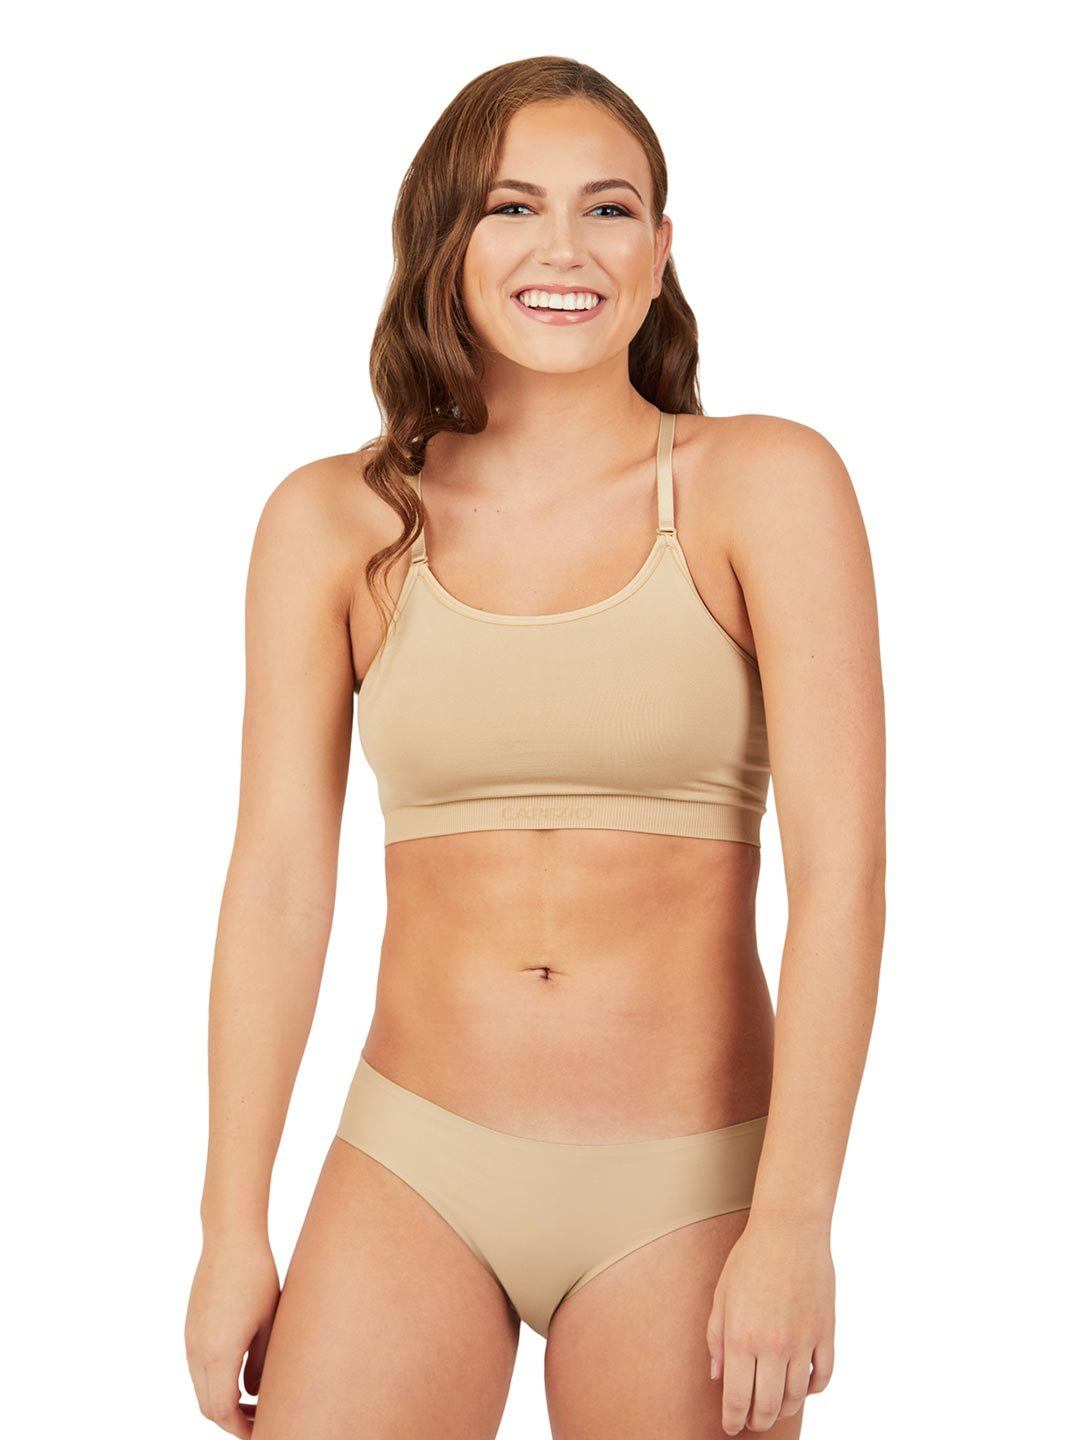 Motionwear Plus Size Removable-Cup Convertible Dance Bra, Nude, 1X, 2X, 3X